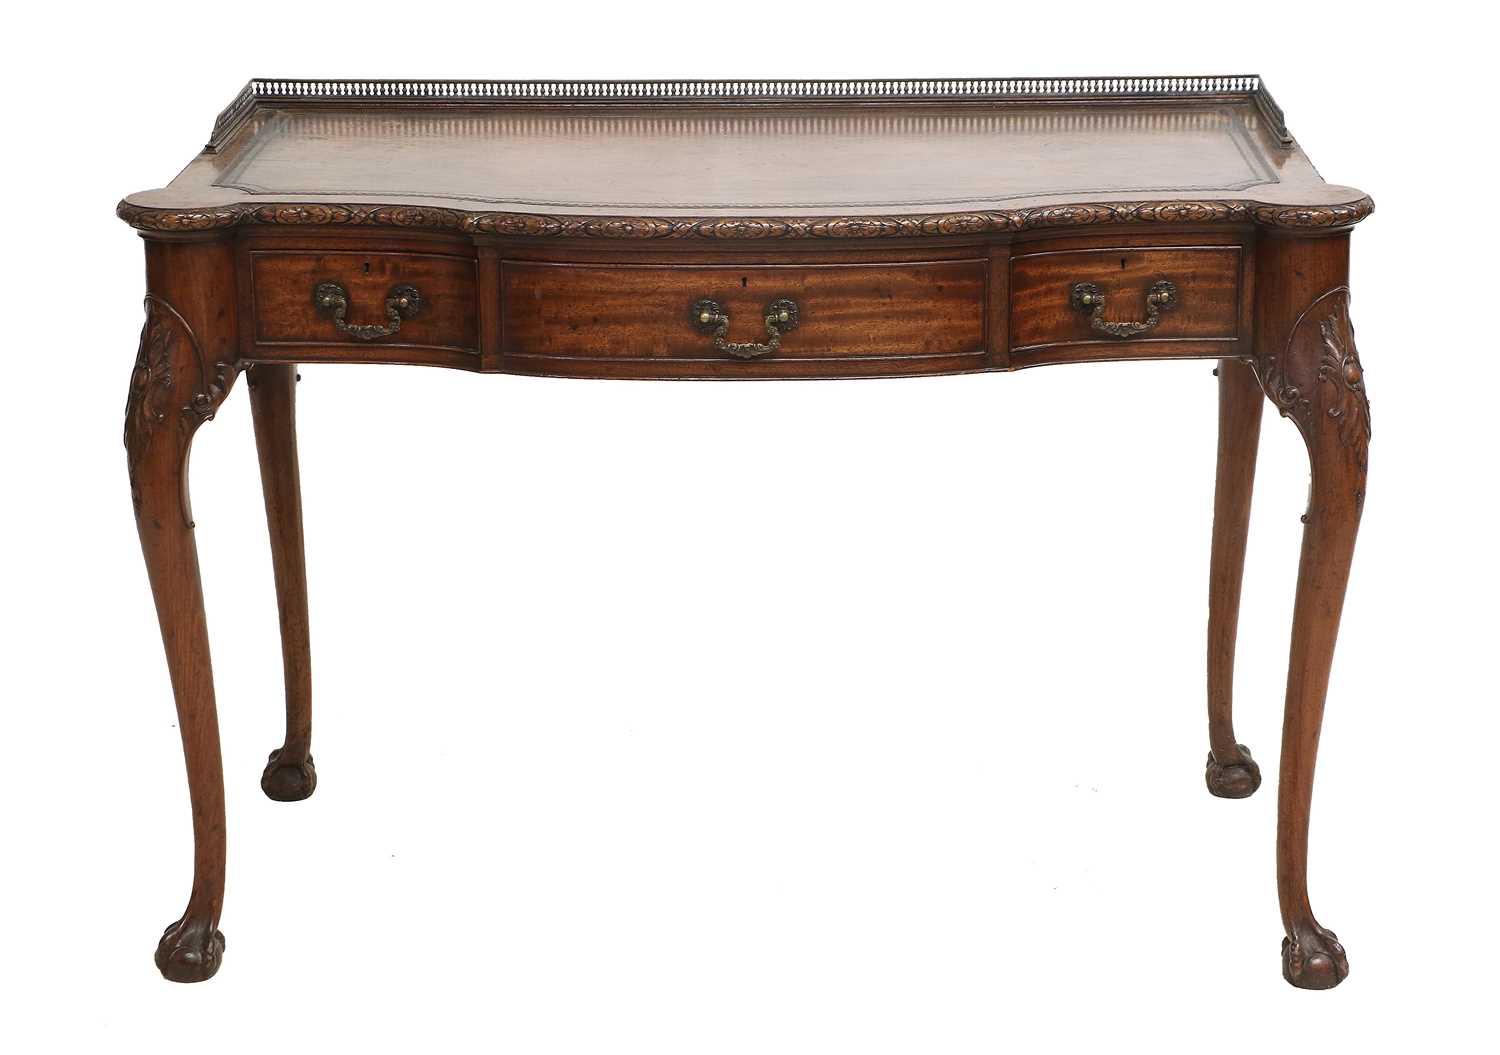 A Late 19th/Early 20th Century Carved Mahogany Writing Table, by Waring & Gillow Ltd, the three-